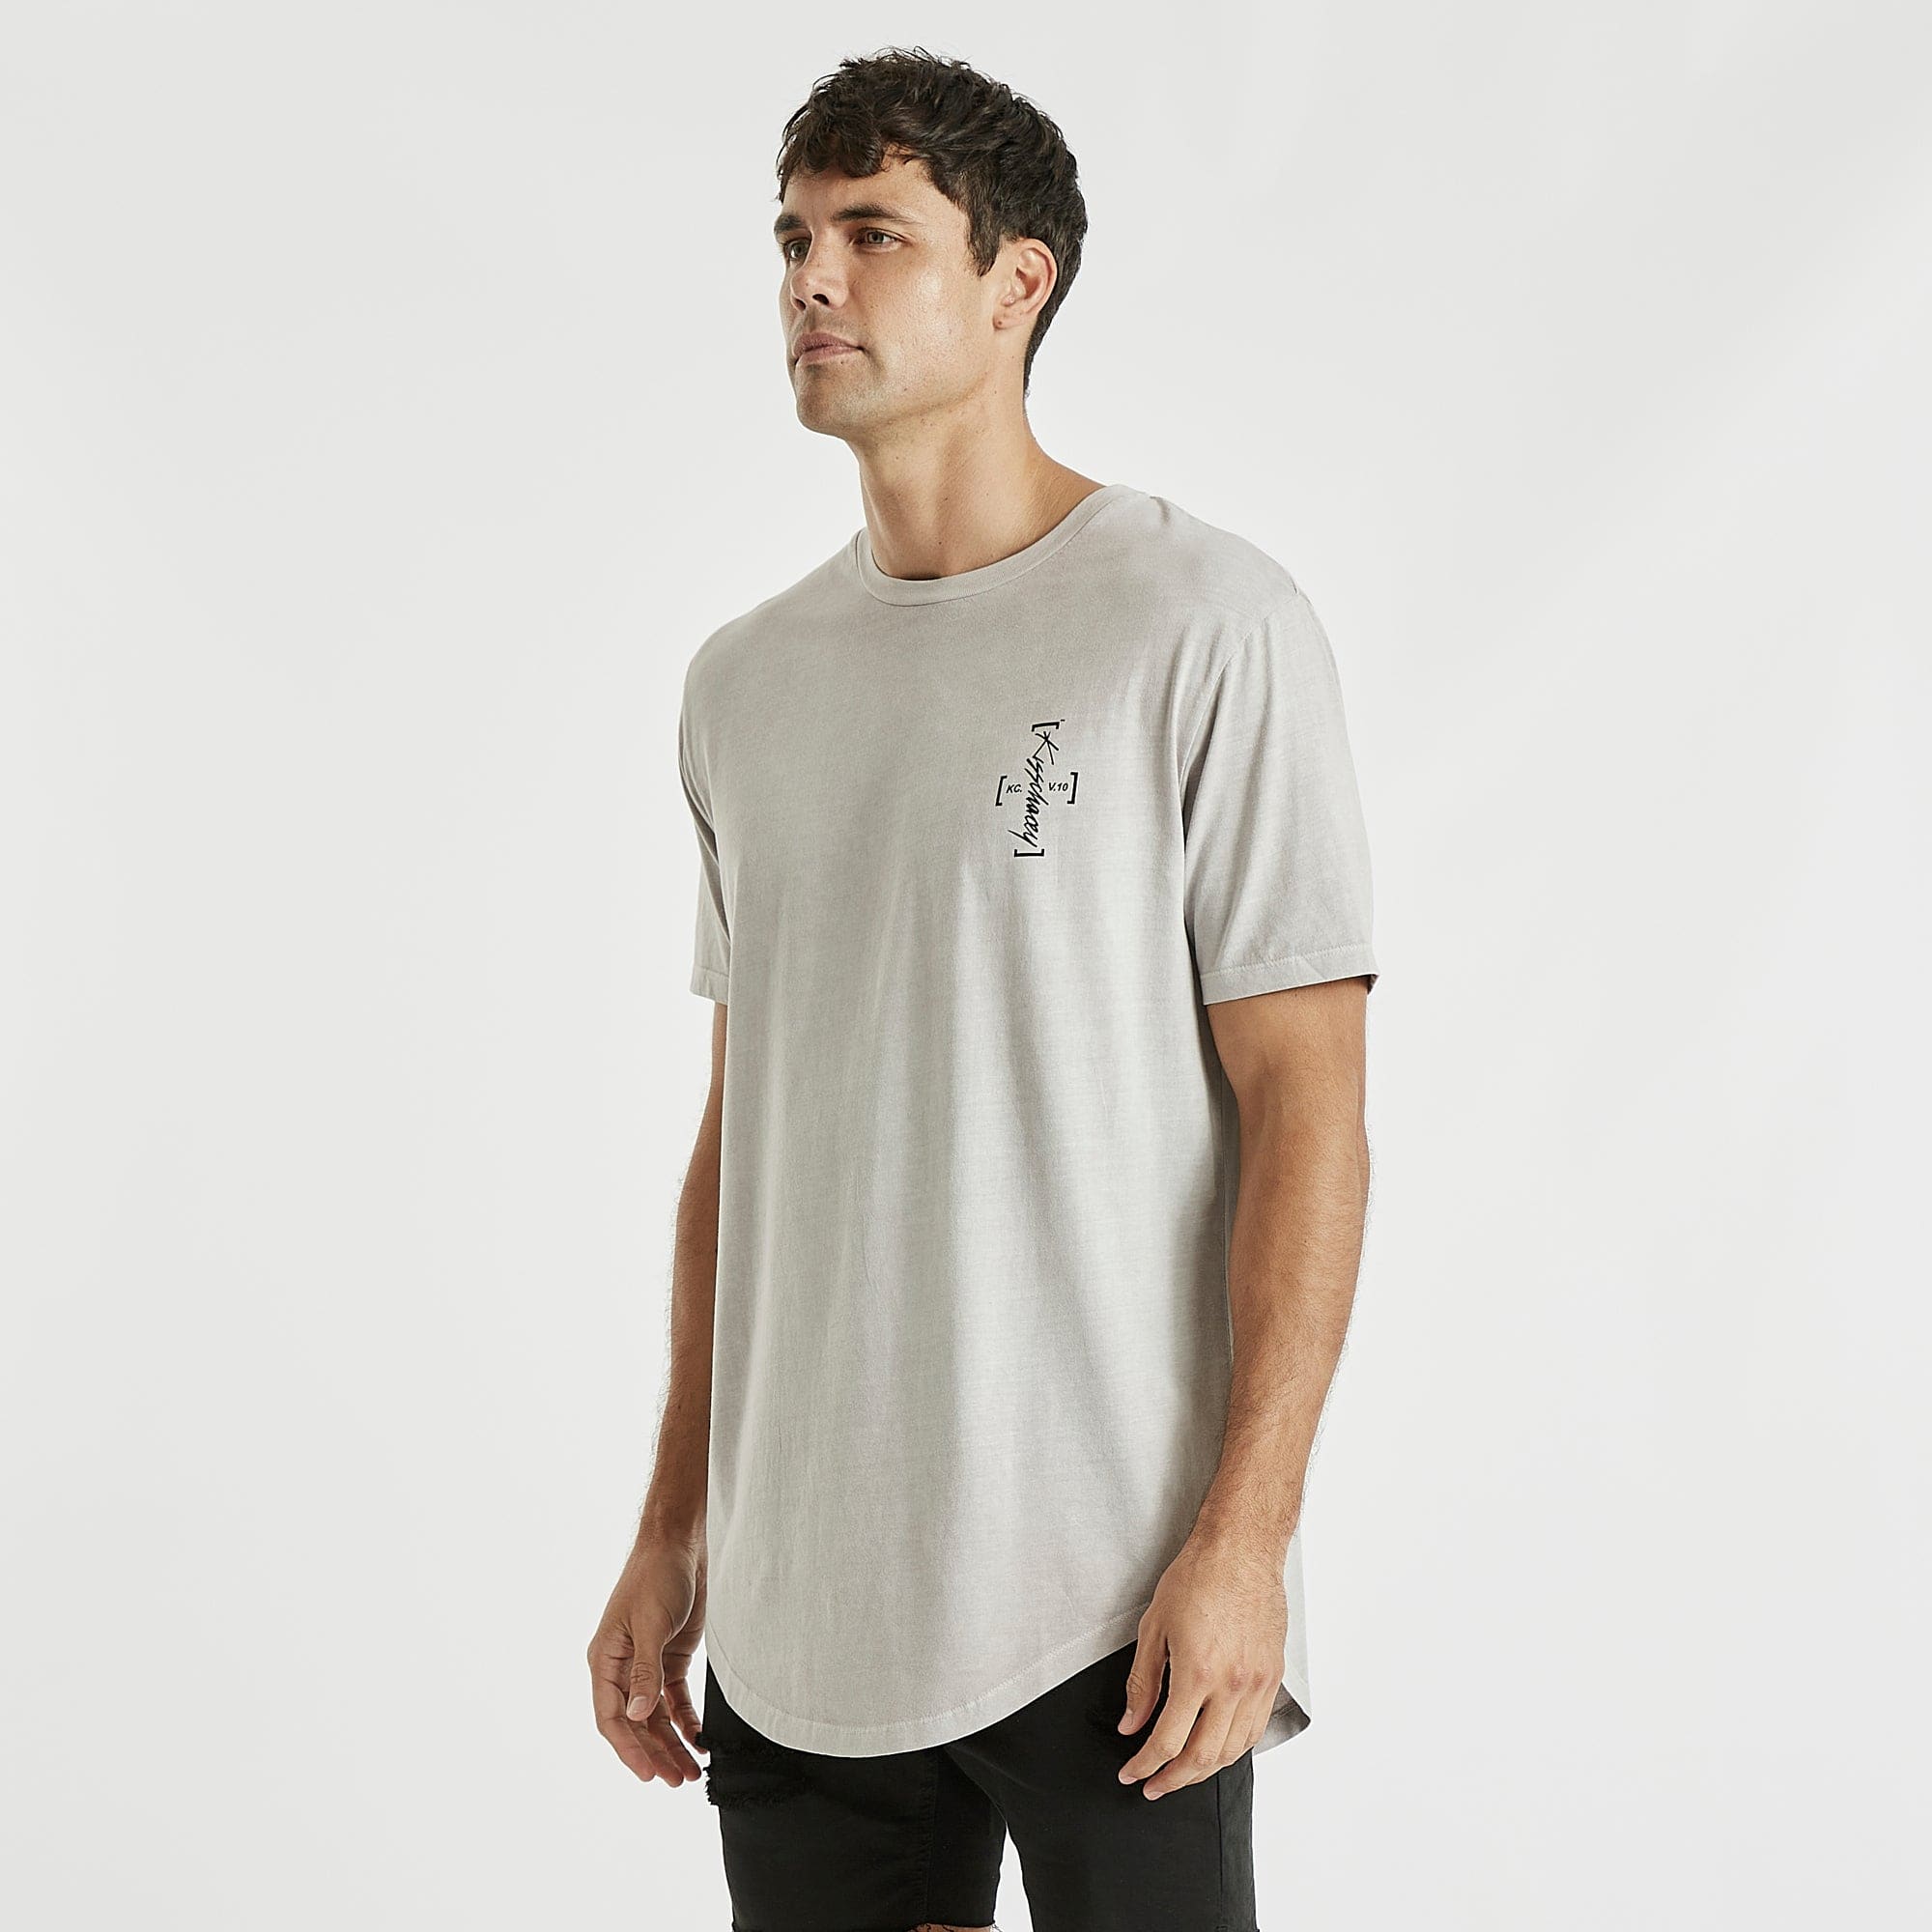 Overlords Dual Curved T-Shirt Pigment Cloud Grey